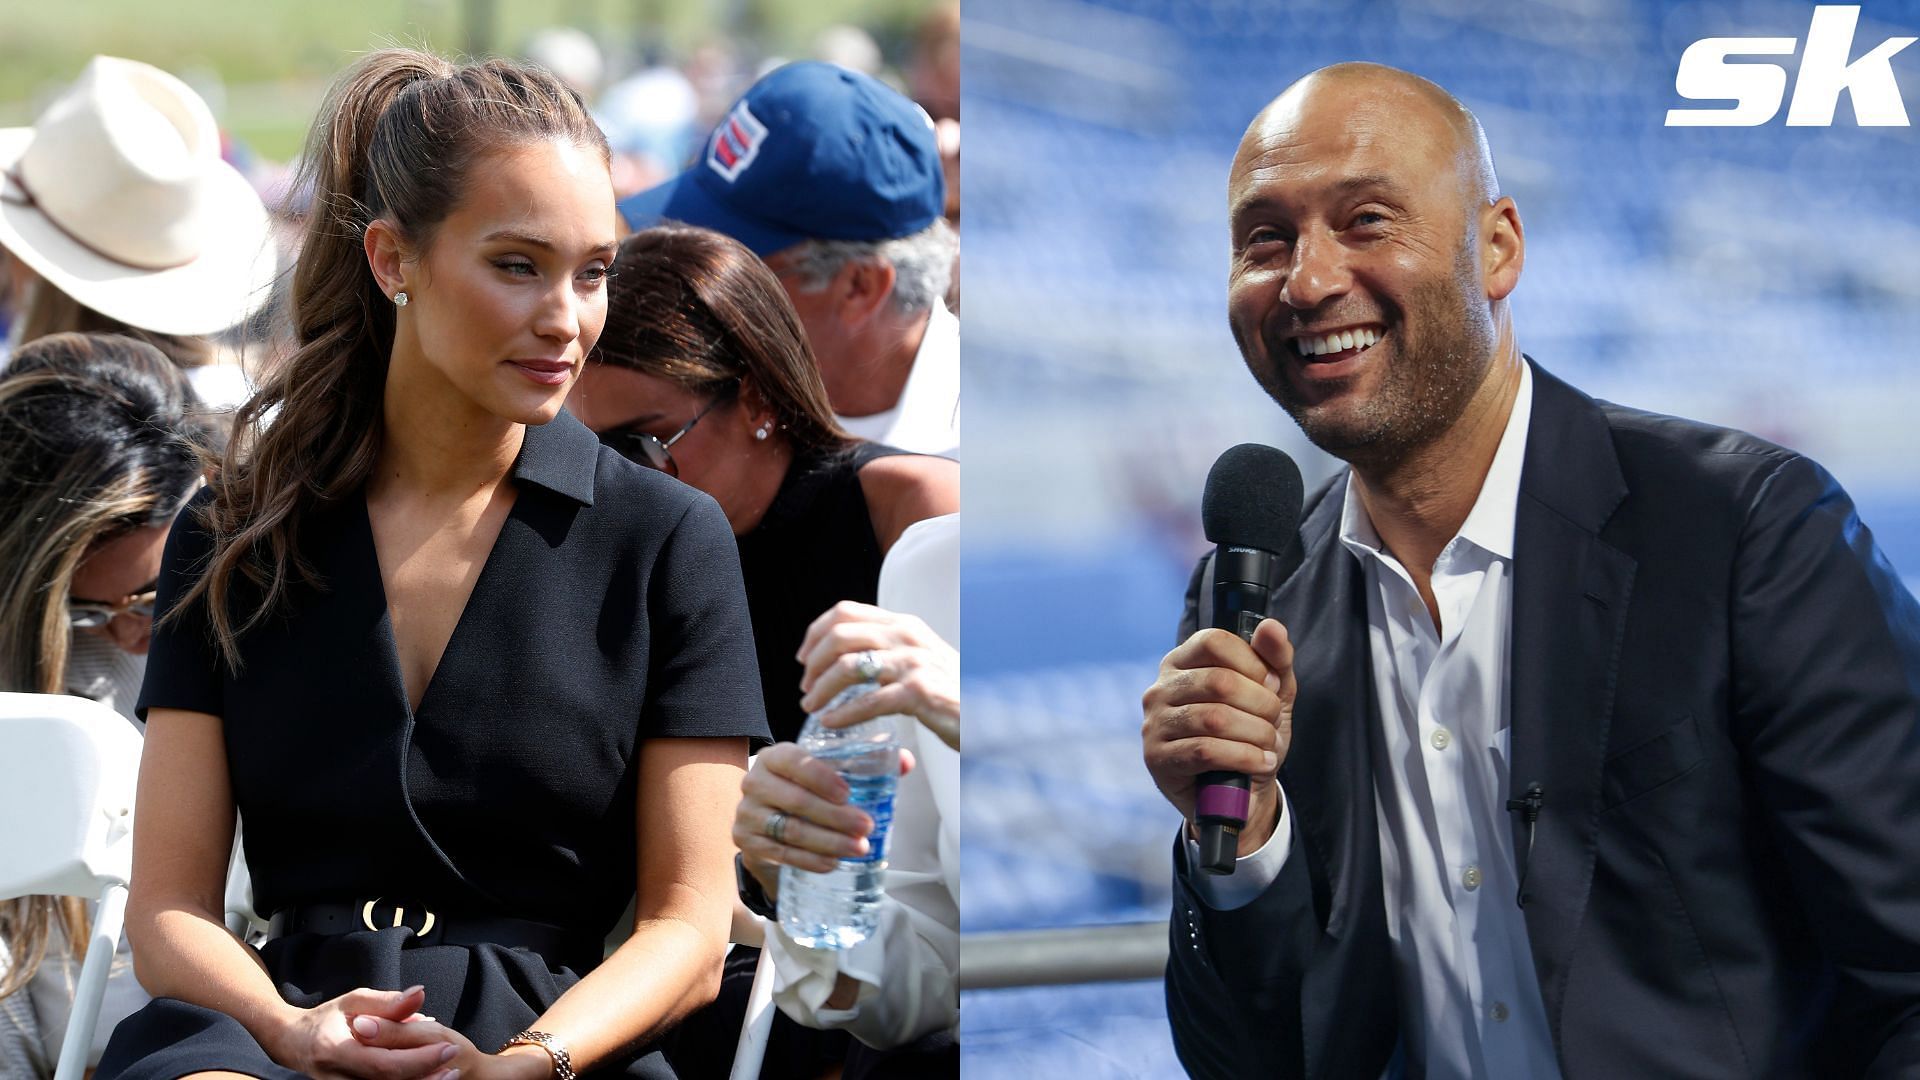 Derek Jeter proposed wife Hannah Jeter with stunning 3-Carat engagement ring potentially worth&nbsp;$300,000